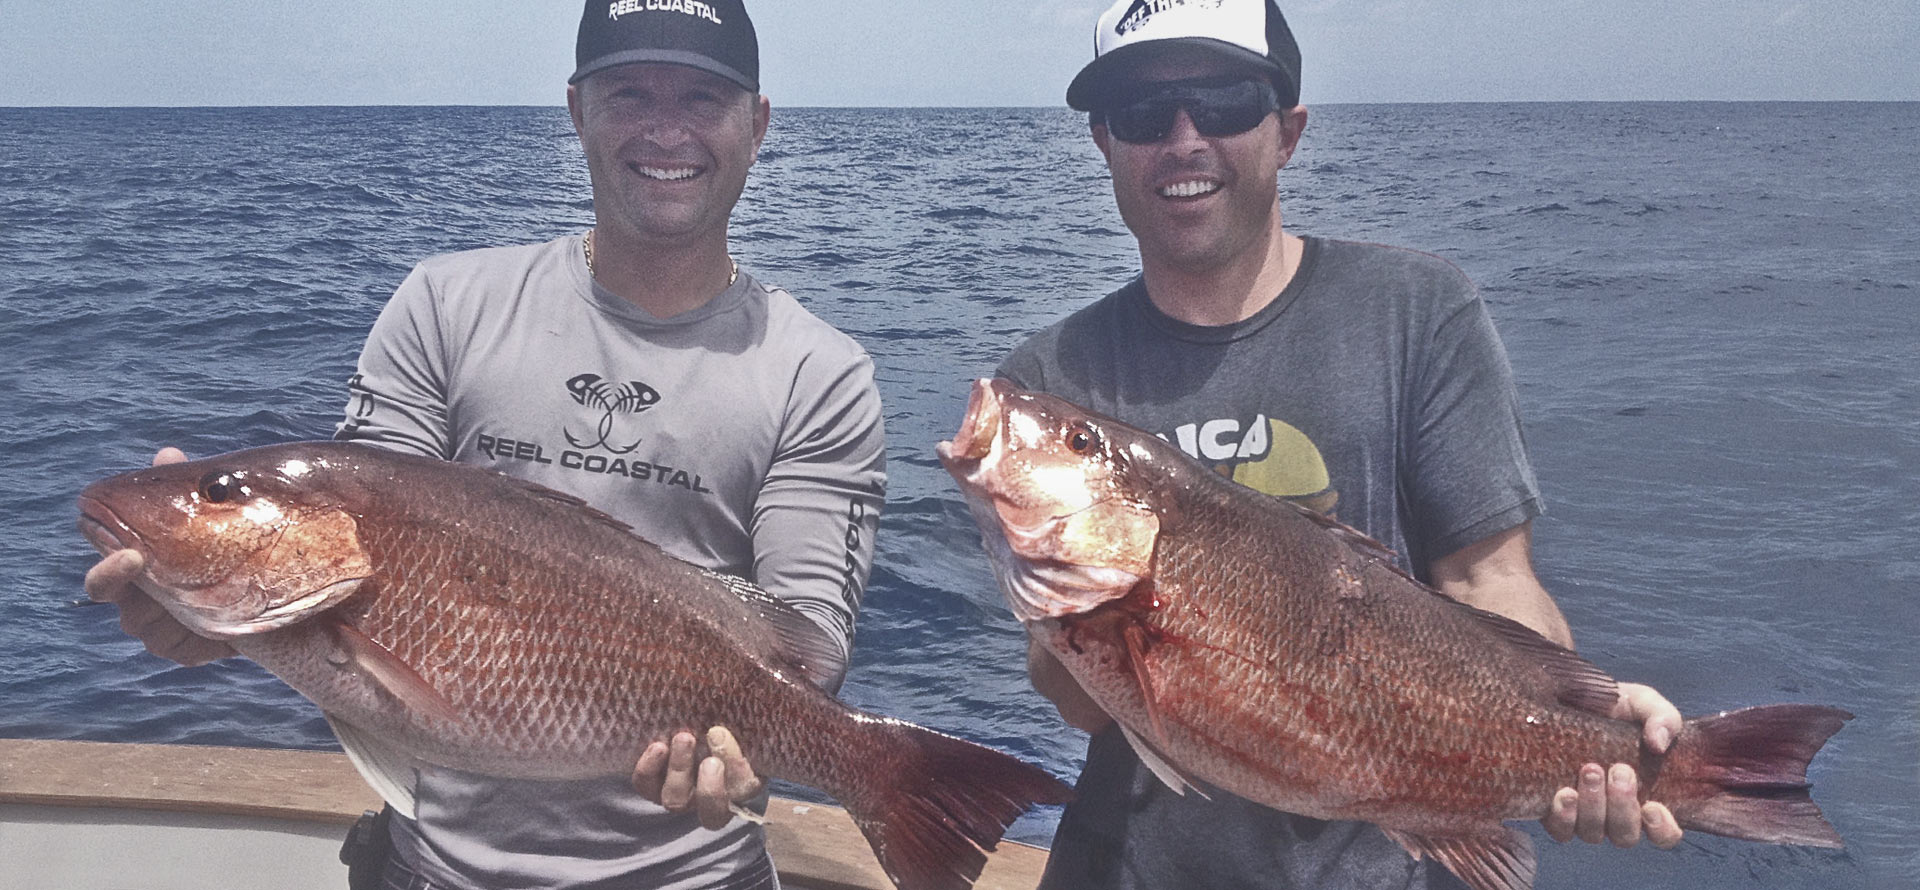 j-hook-fishing-charters-st-augustine-florida-daily-catch-snapper-reel-coastal